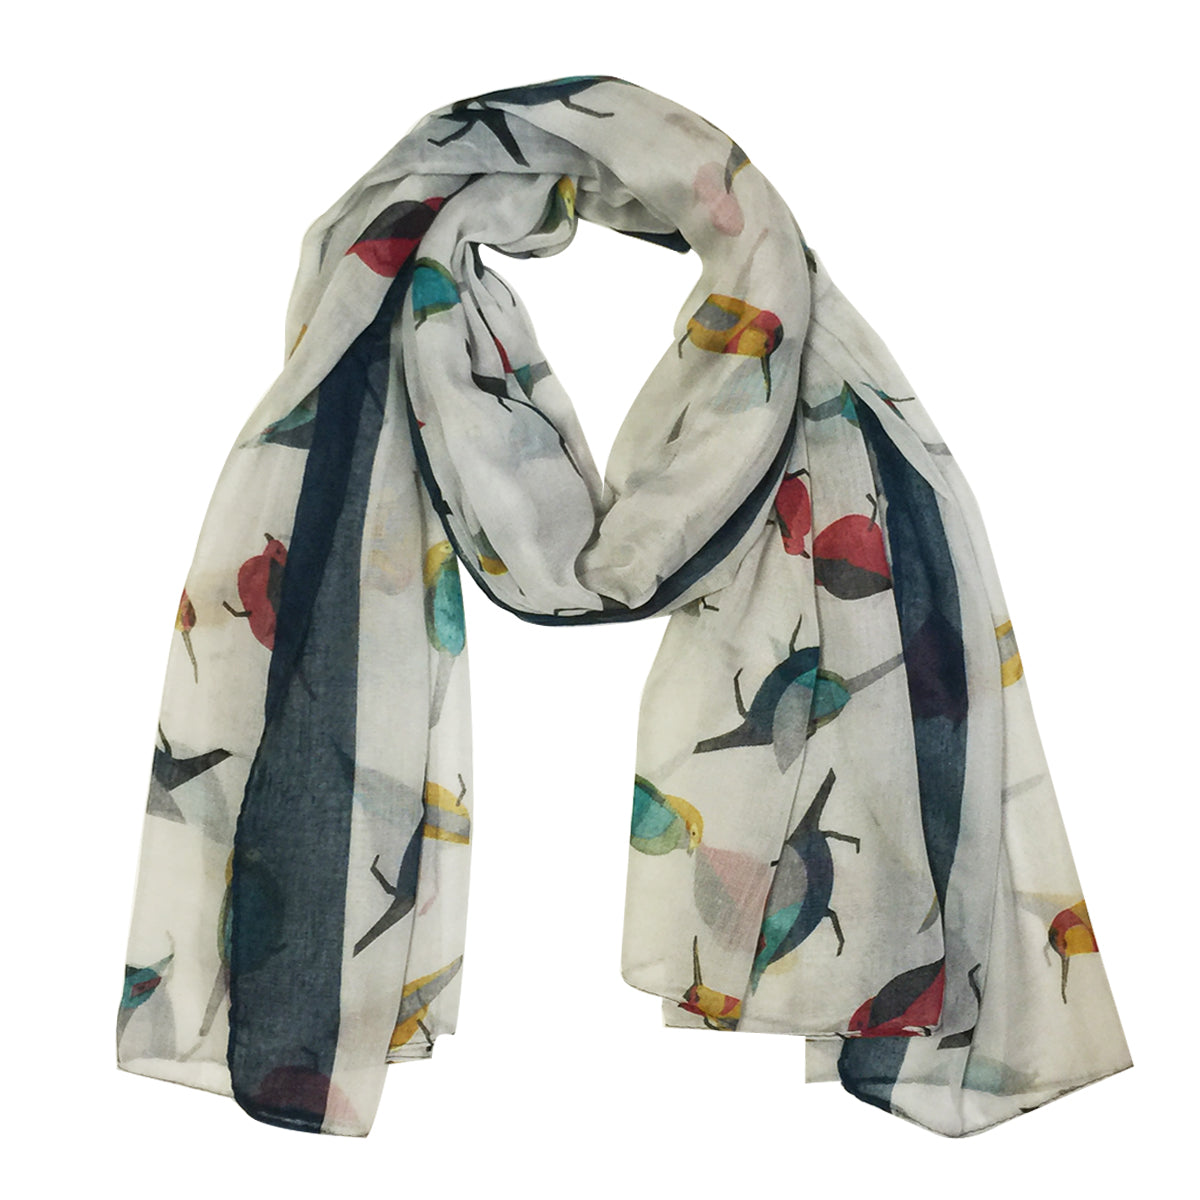 Beige birds and flowers scarf